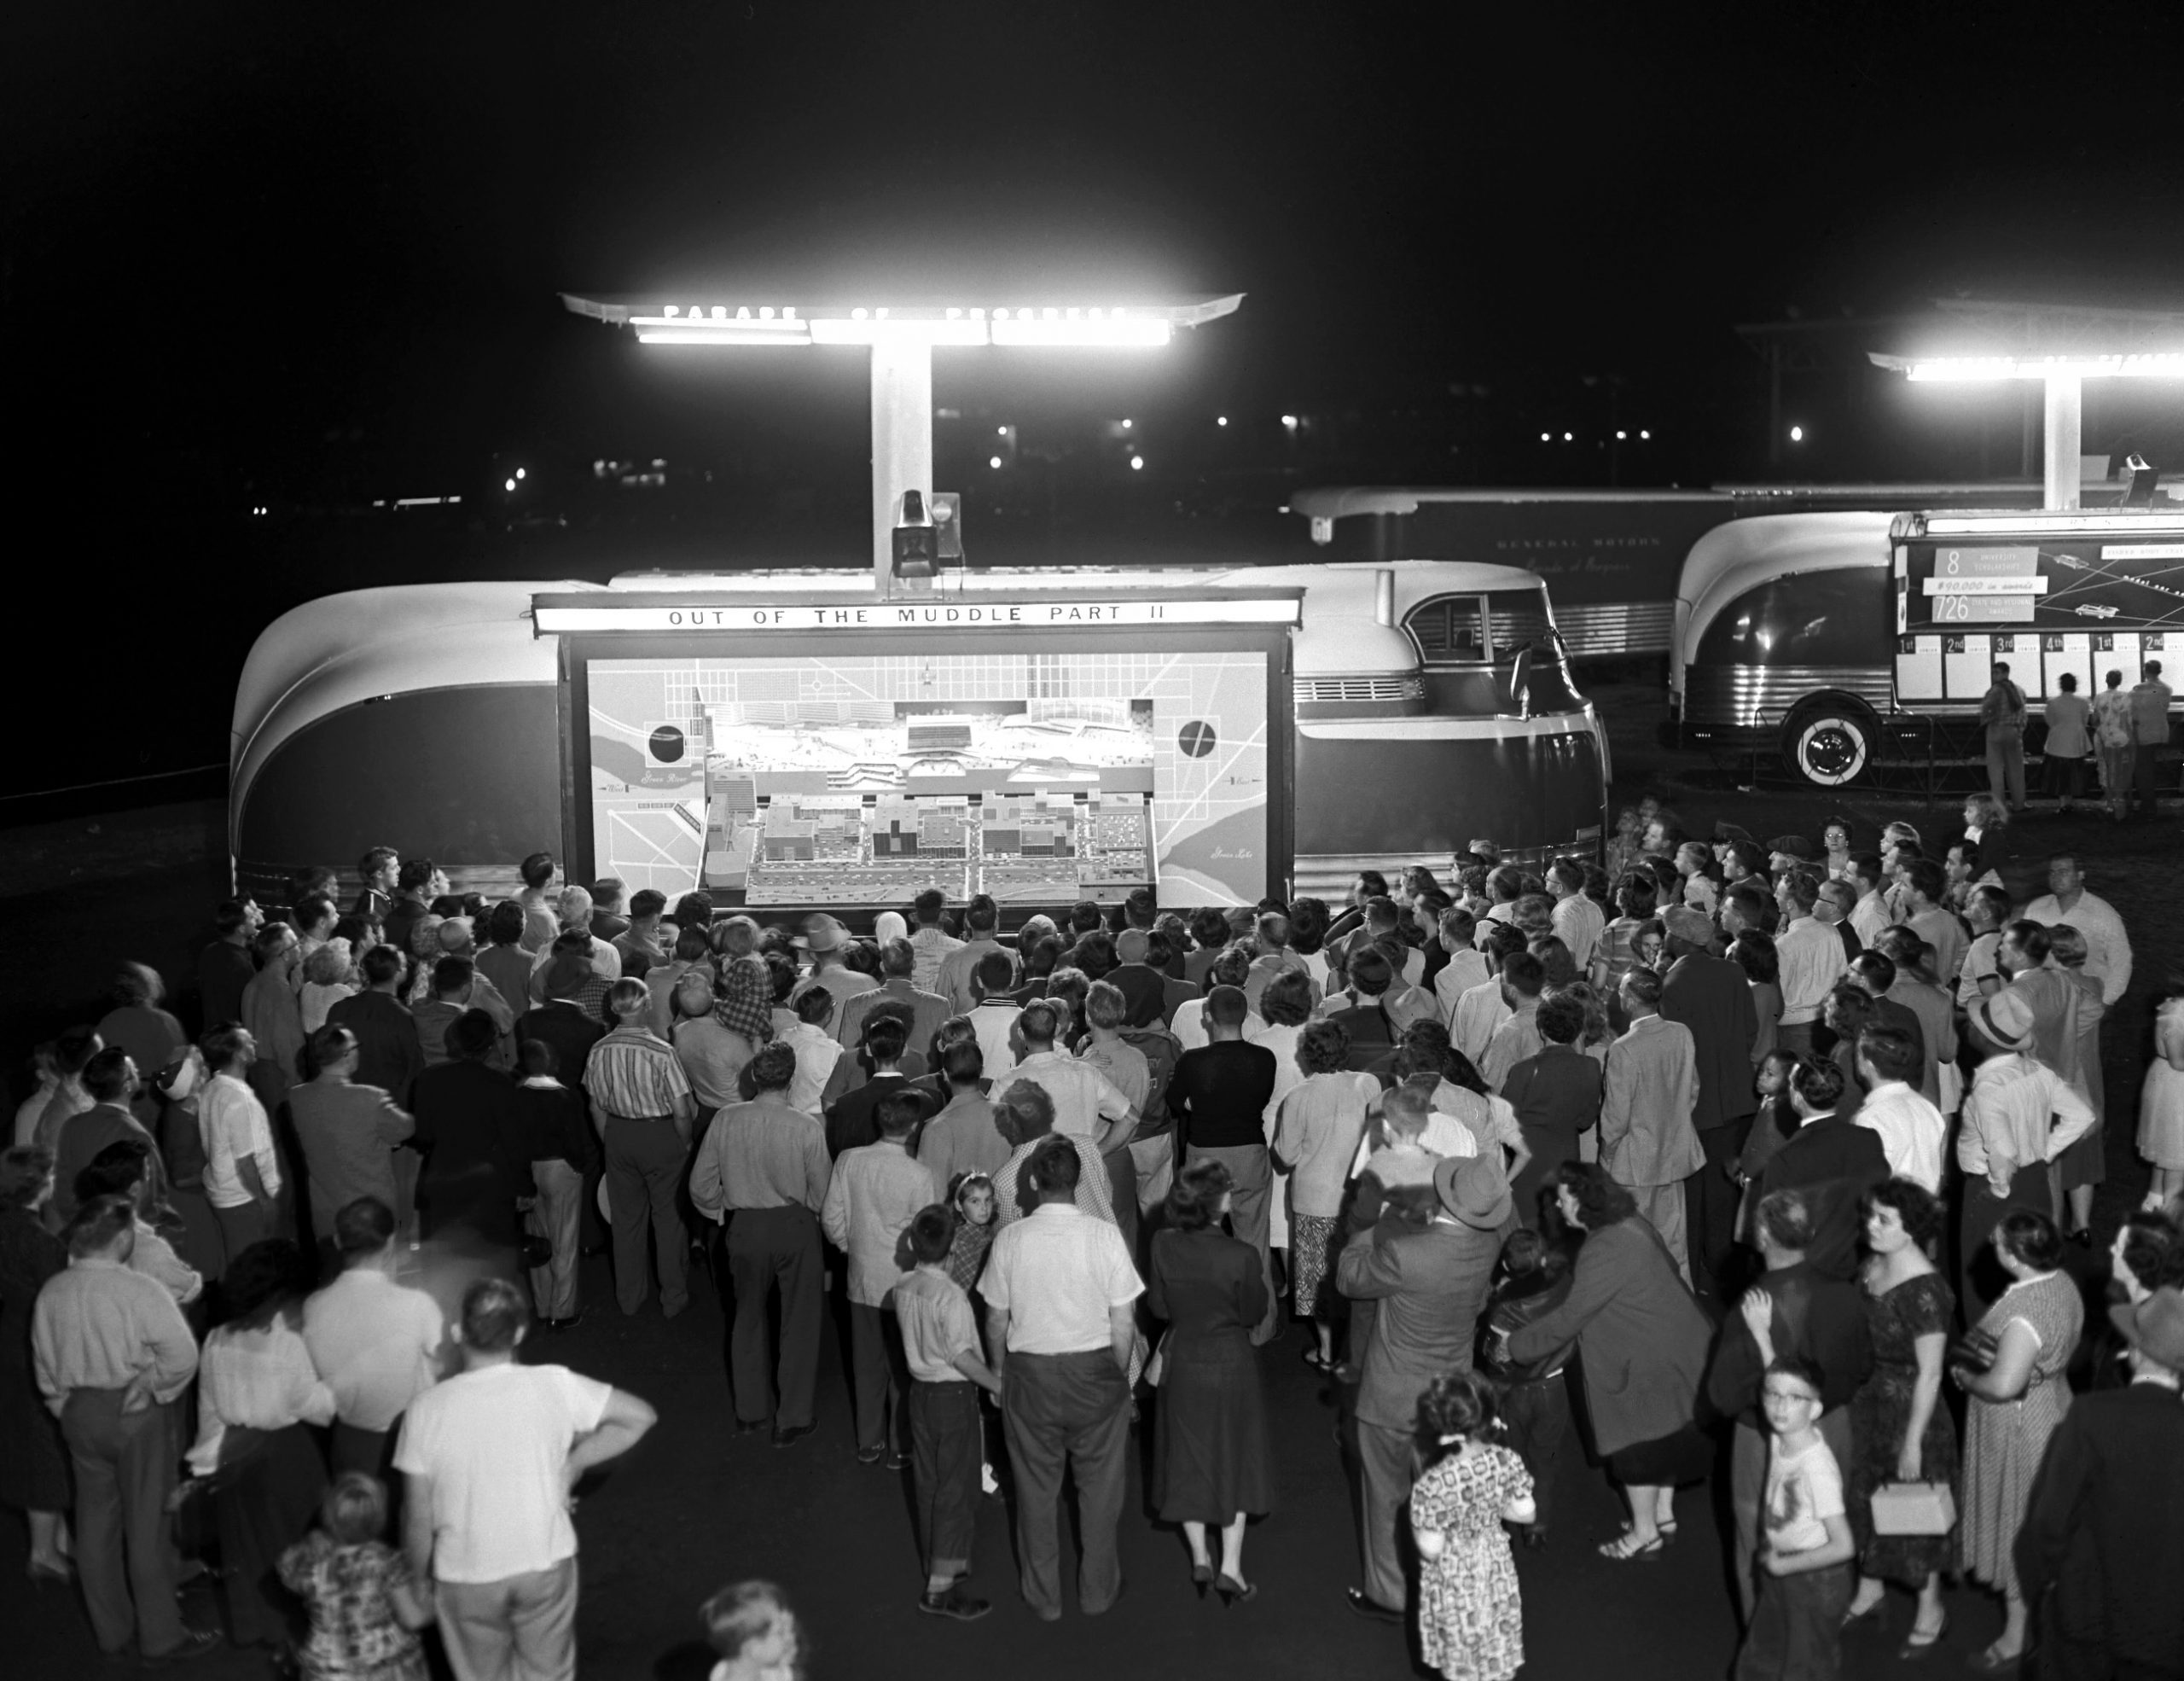 night scene of a Futurliner with light tower deployed and people crowded around the stage